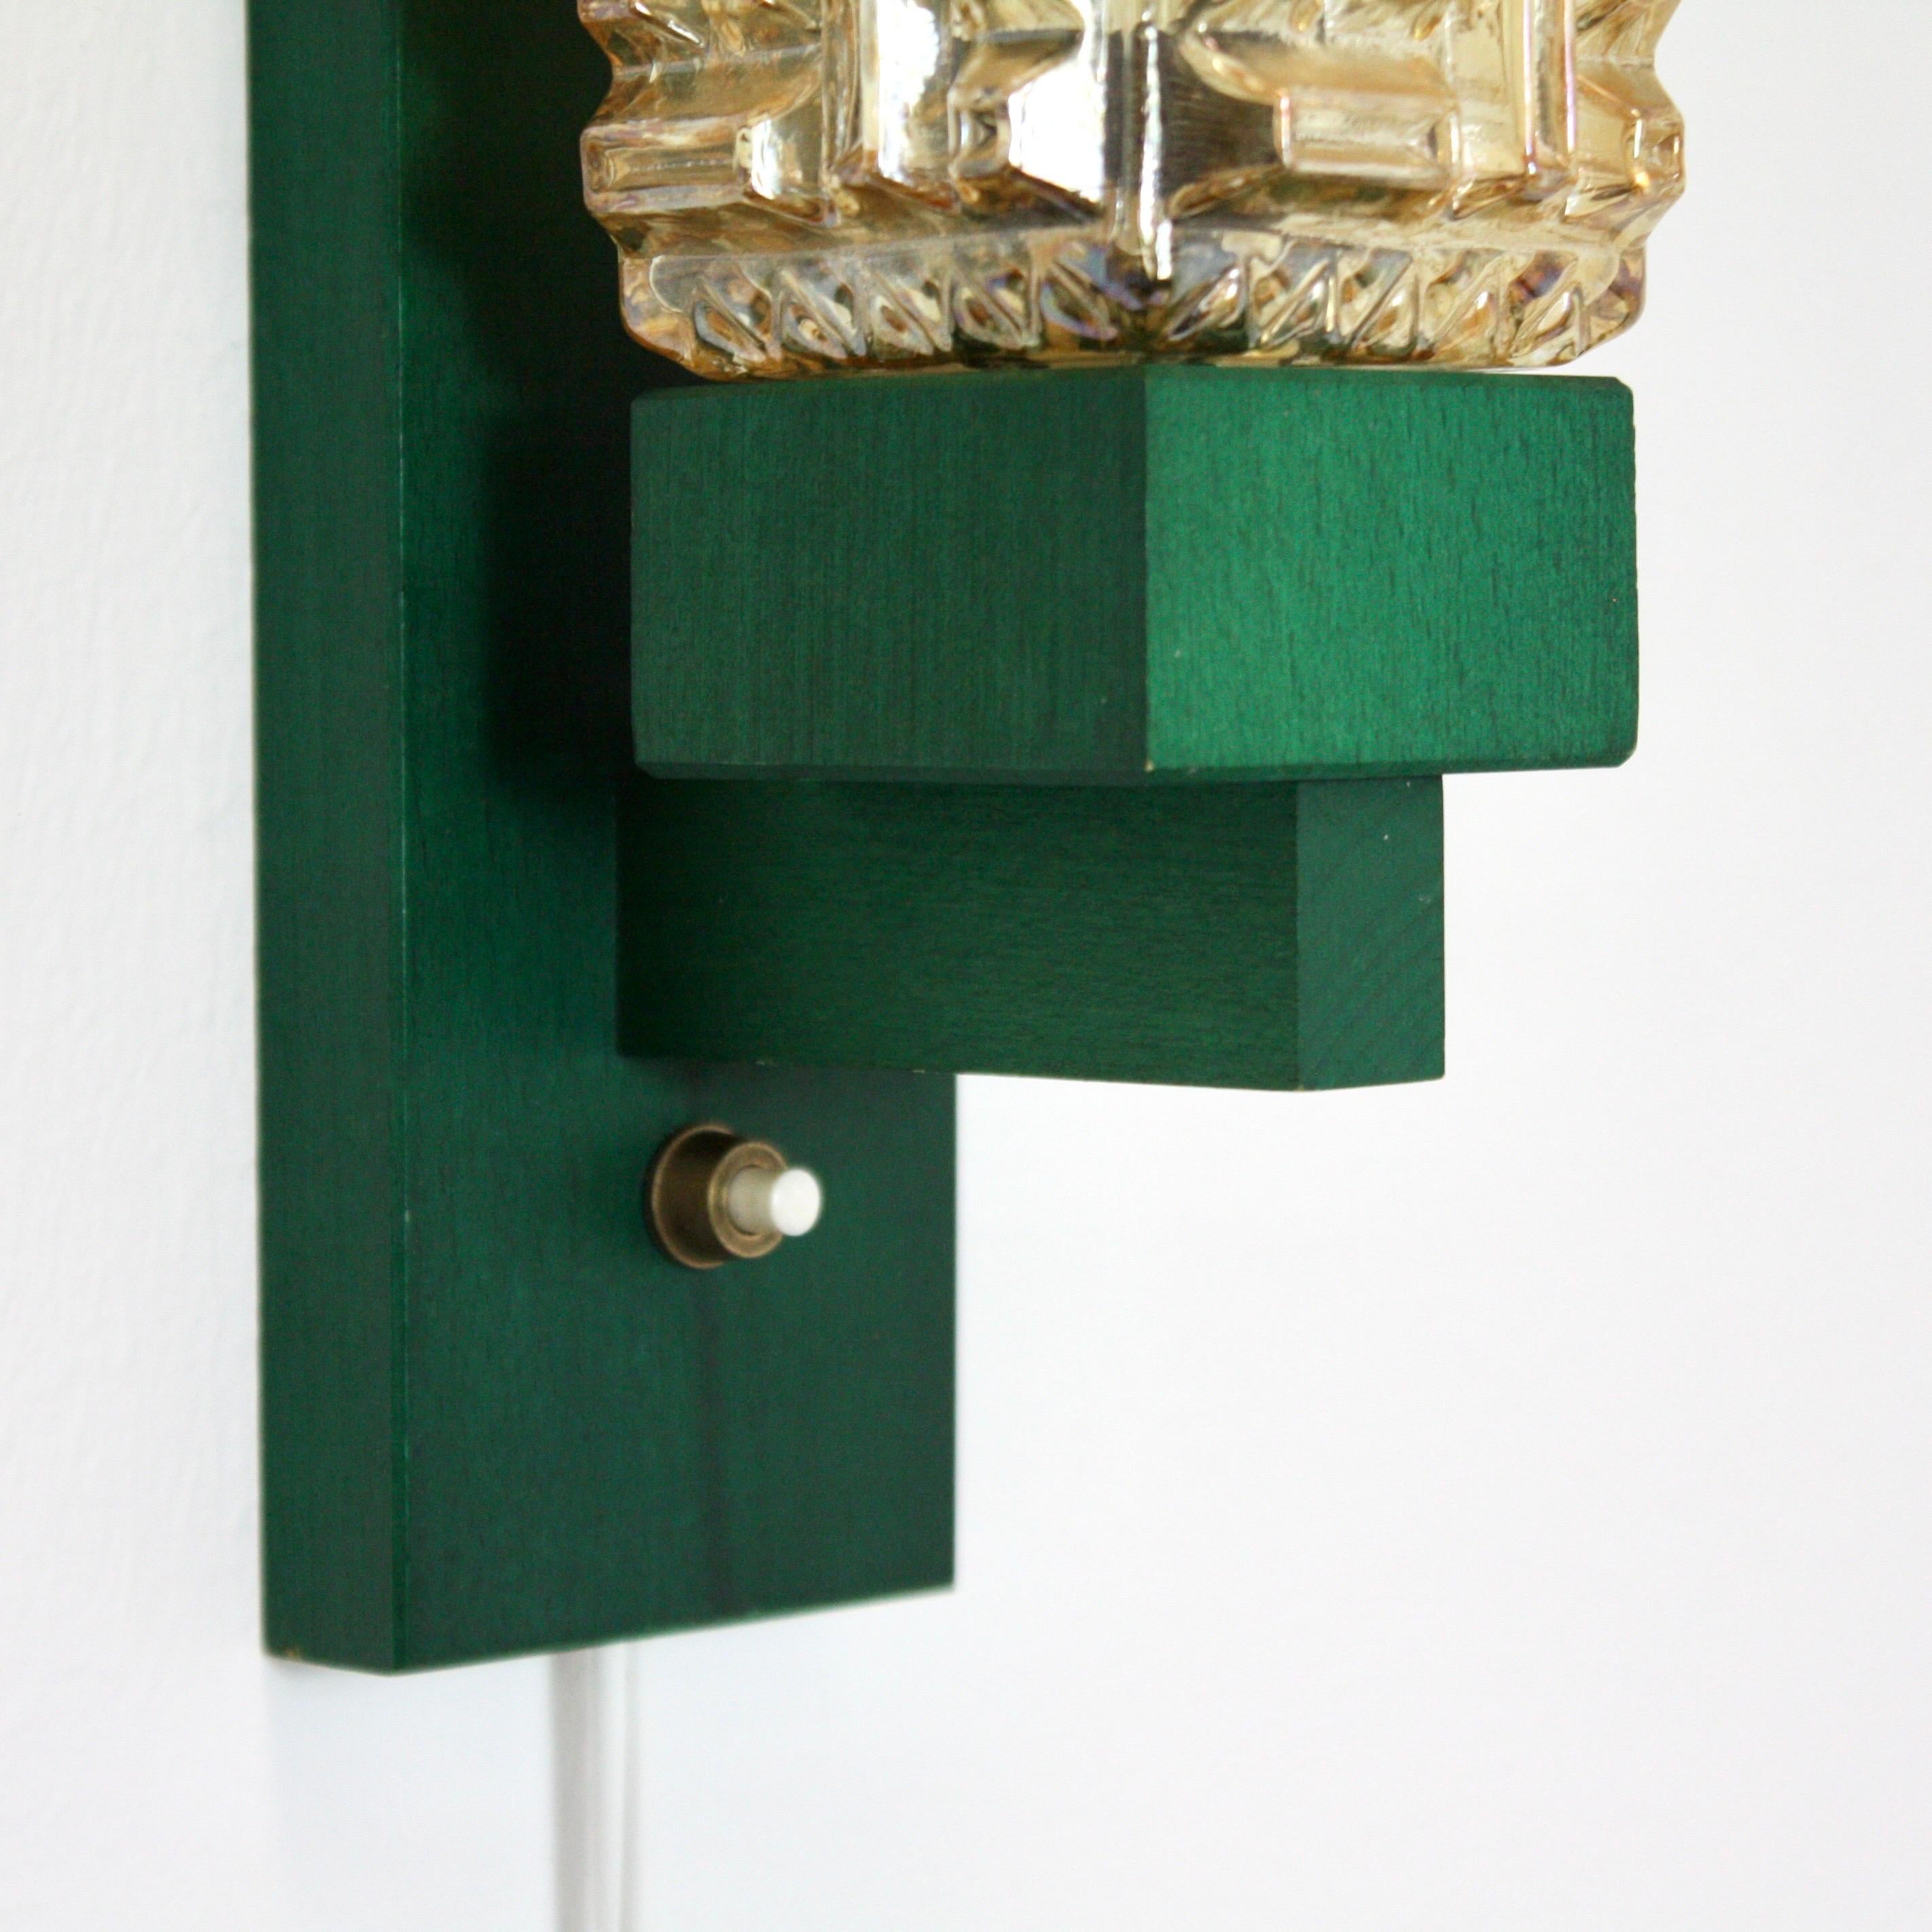 Set of 'Vitrika' Wall Lamps in green stained wood & Amber Glass, Denmark, 1970s For Sale 1